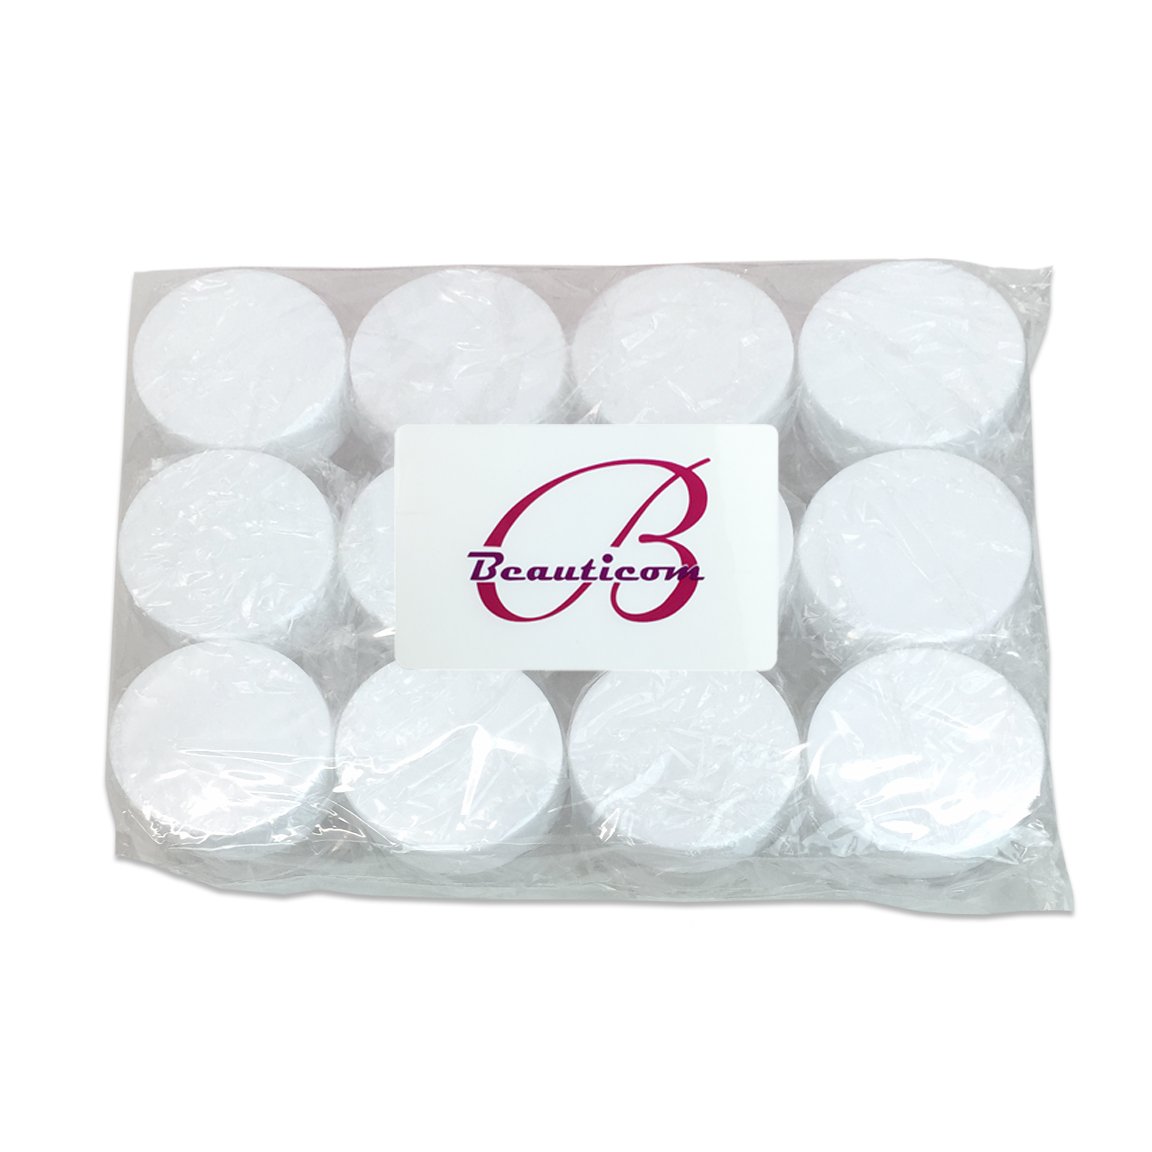 Beauticom 12 Pieces 20G/20ML Round Clear Jars with White Lids for Lotion, Creams, Toners, Lip Balms, Makeup Samples - BPA Free